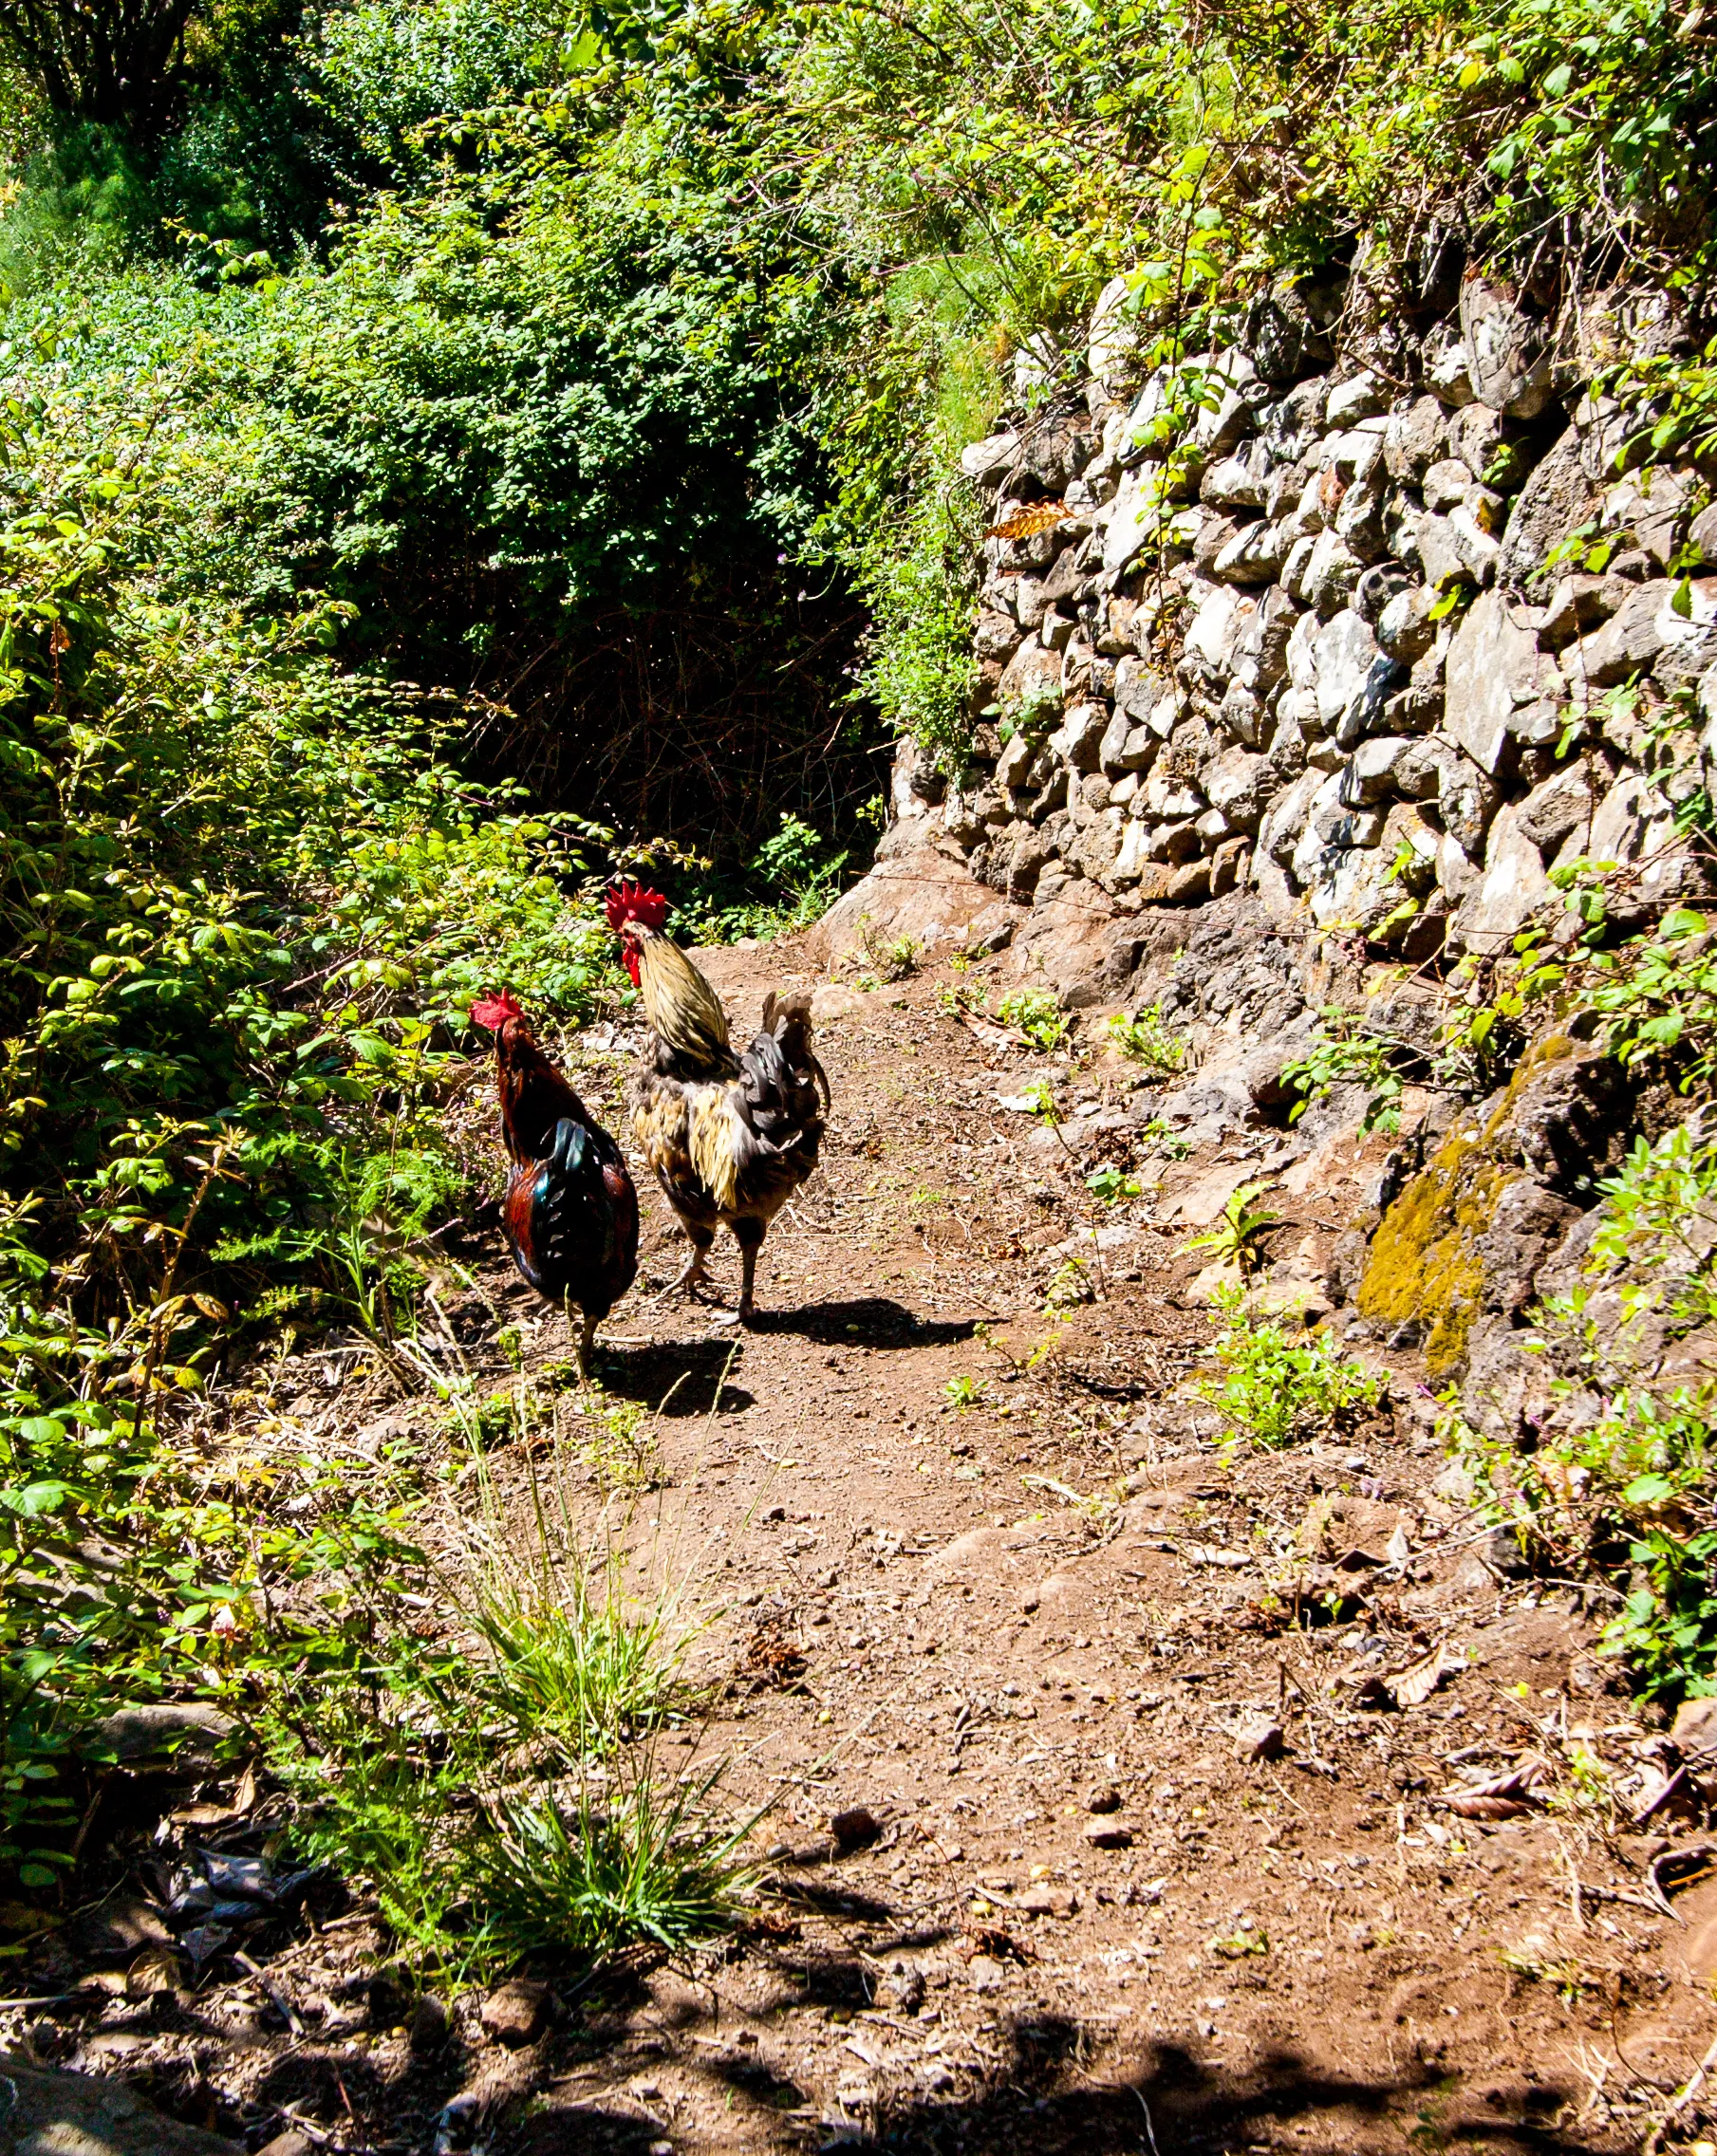 Some roosters on the route ;-)